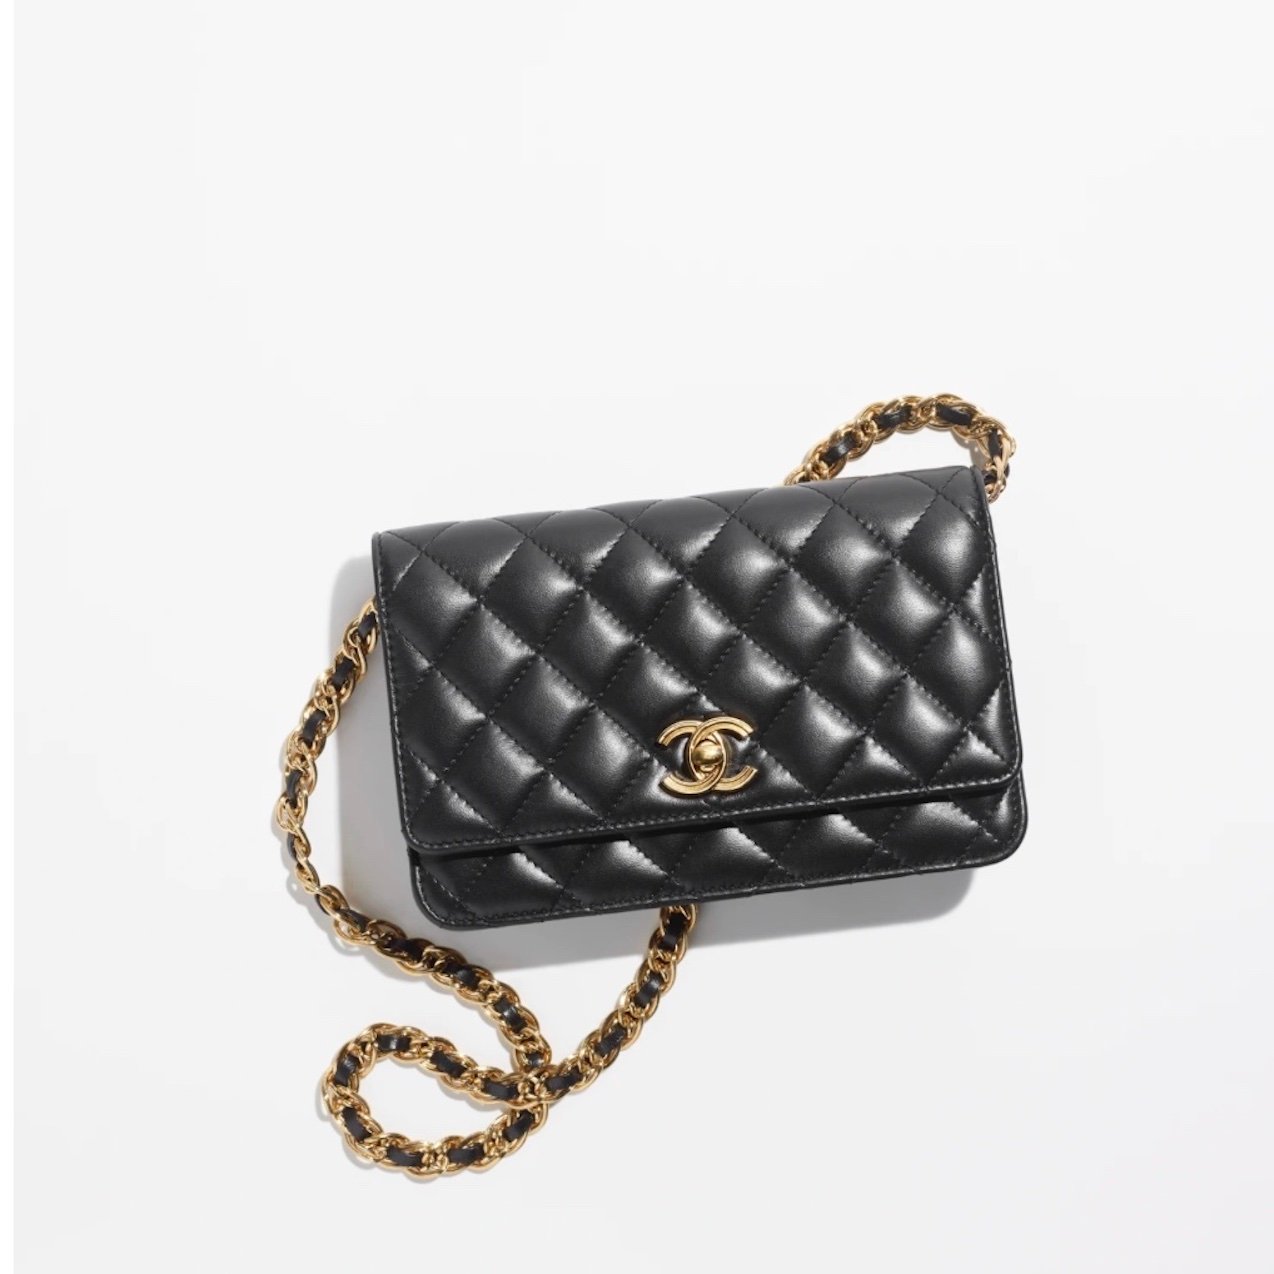 CHANEL Caviar Quilted Wallet on Chain WOC Black 1265449